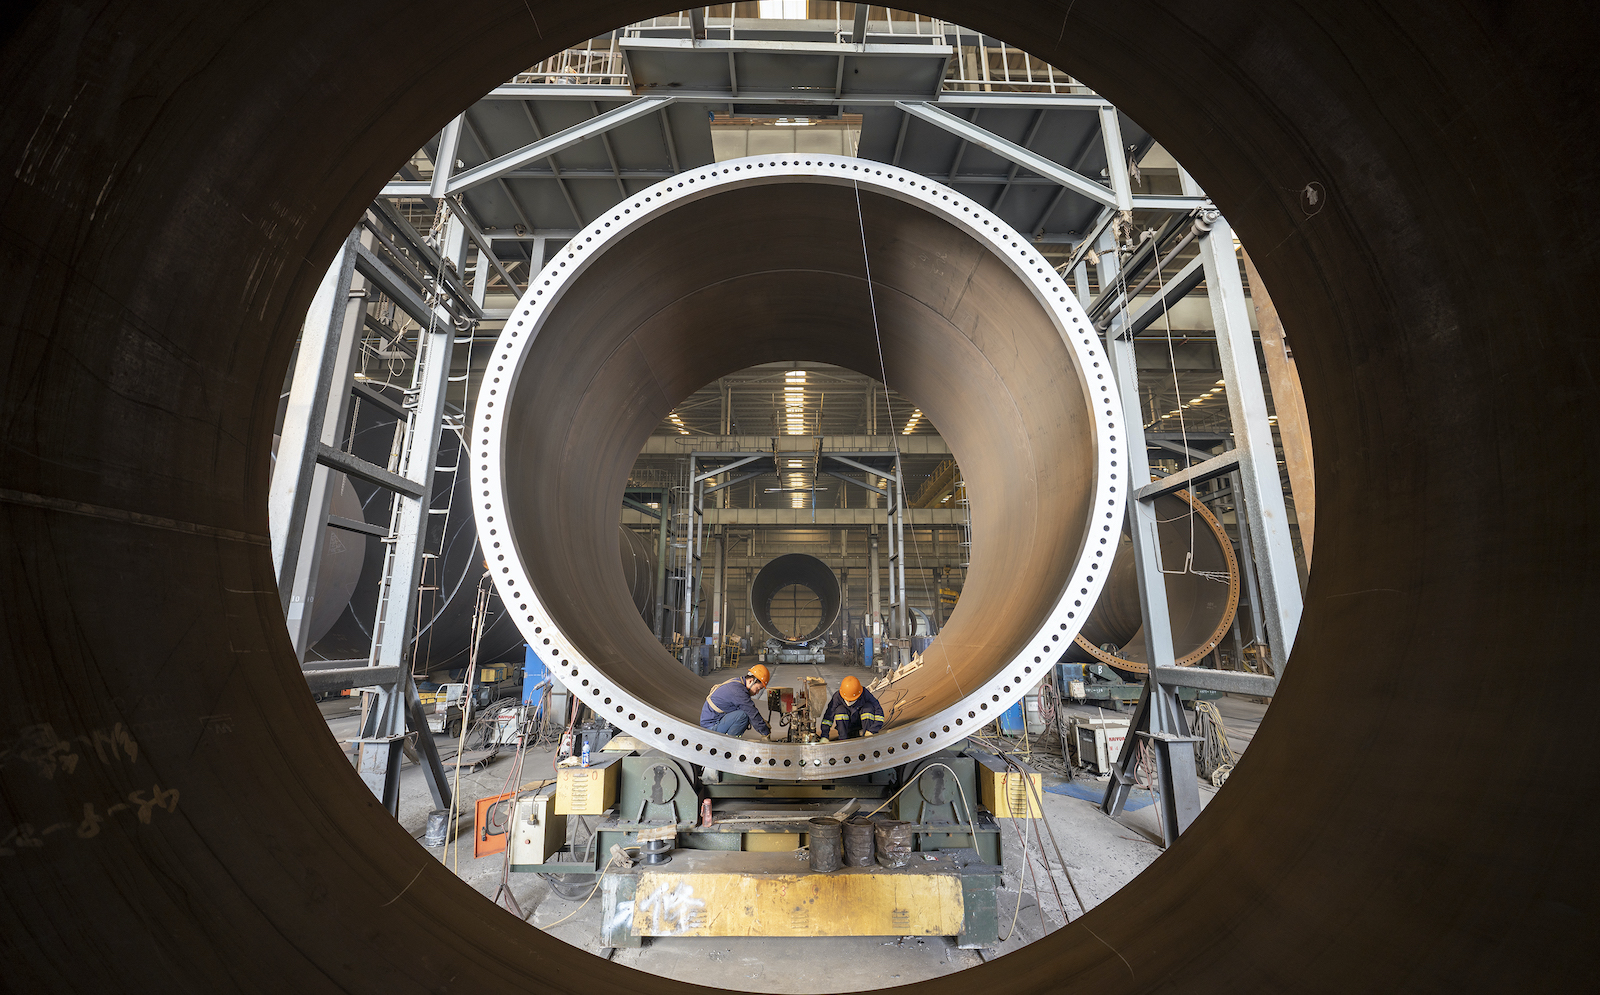 The mouth of a hollow wind turbine monopile with workers welding inside